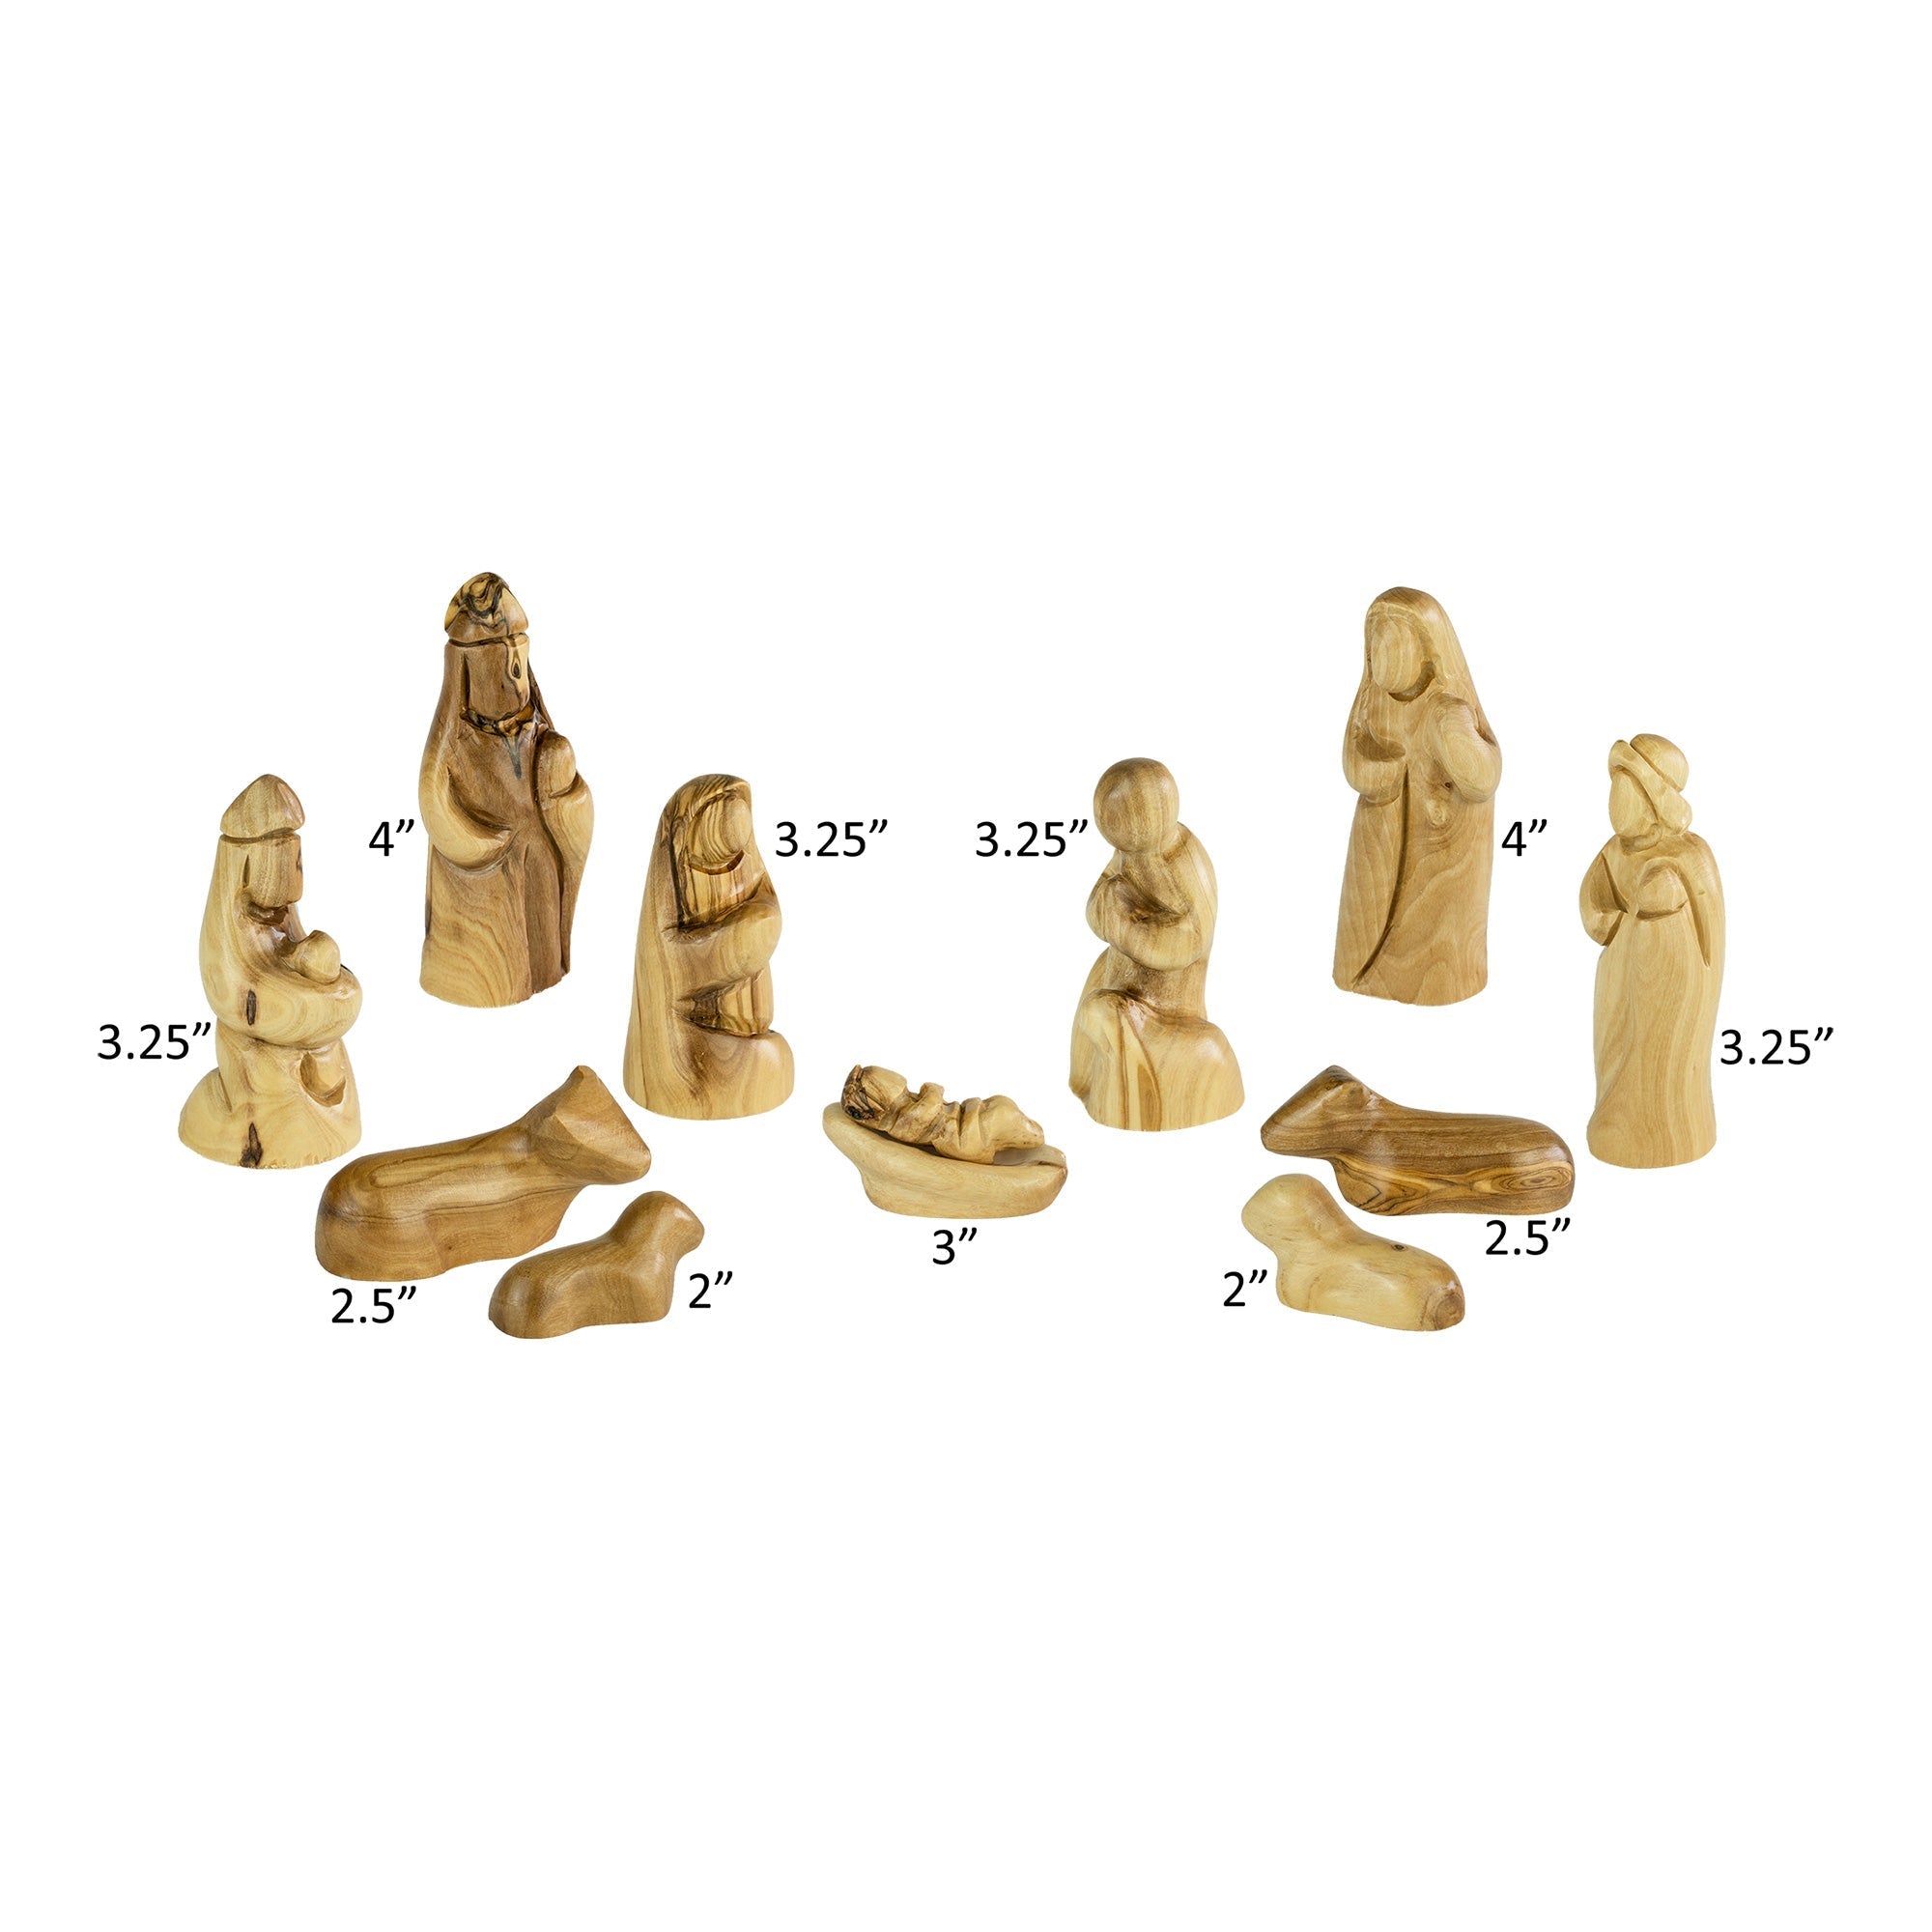 Holy Land Olive Wood Nativity with Large Bark Roof Stable and Small Faceless Figurines